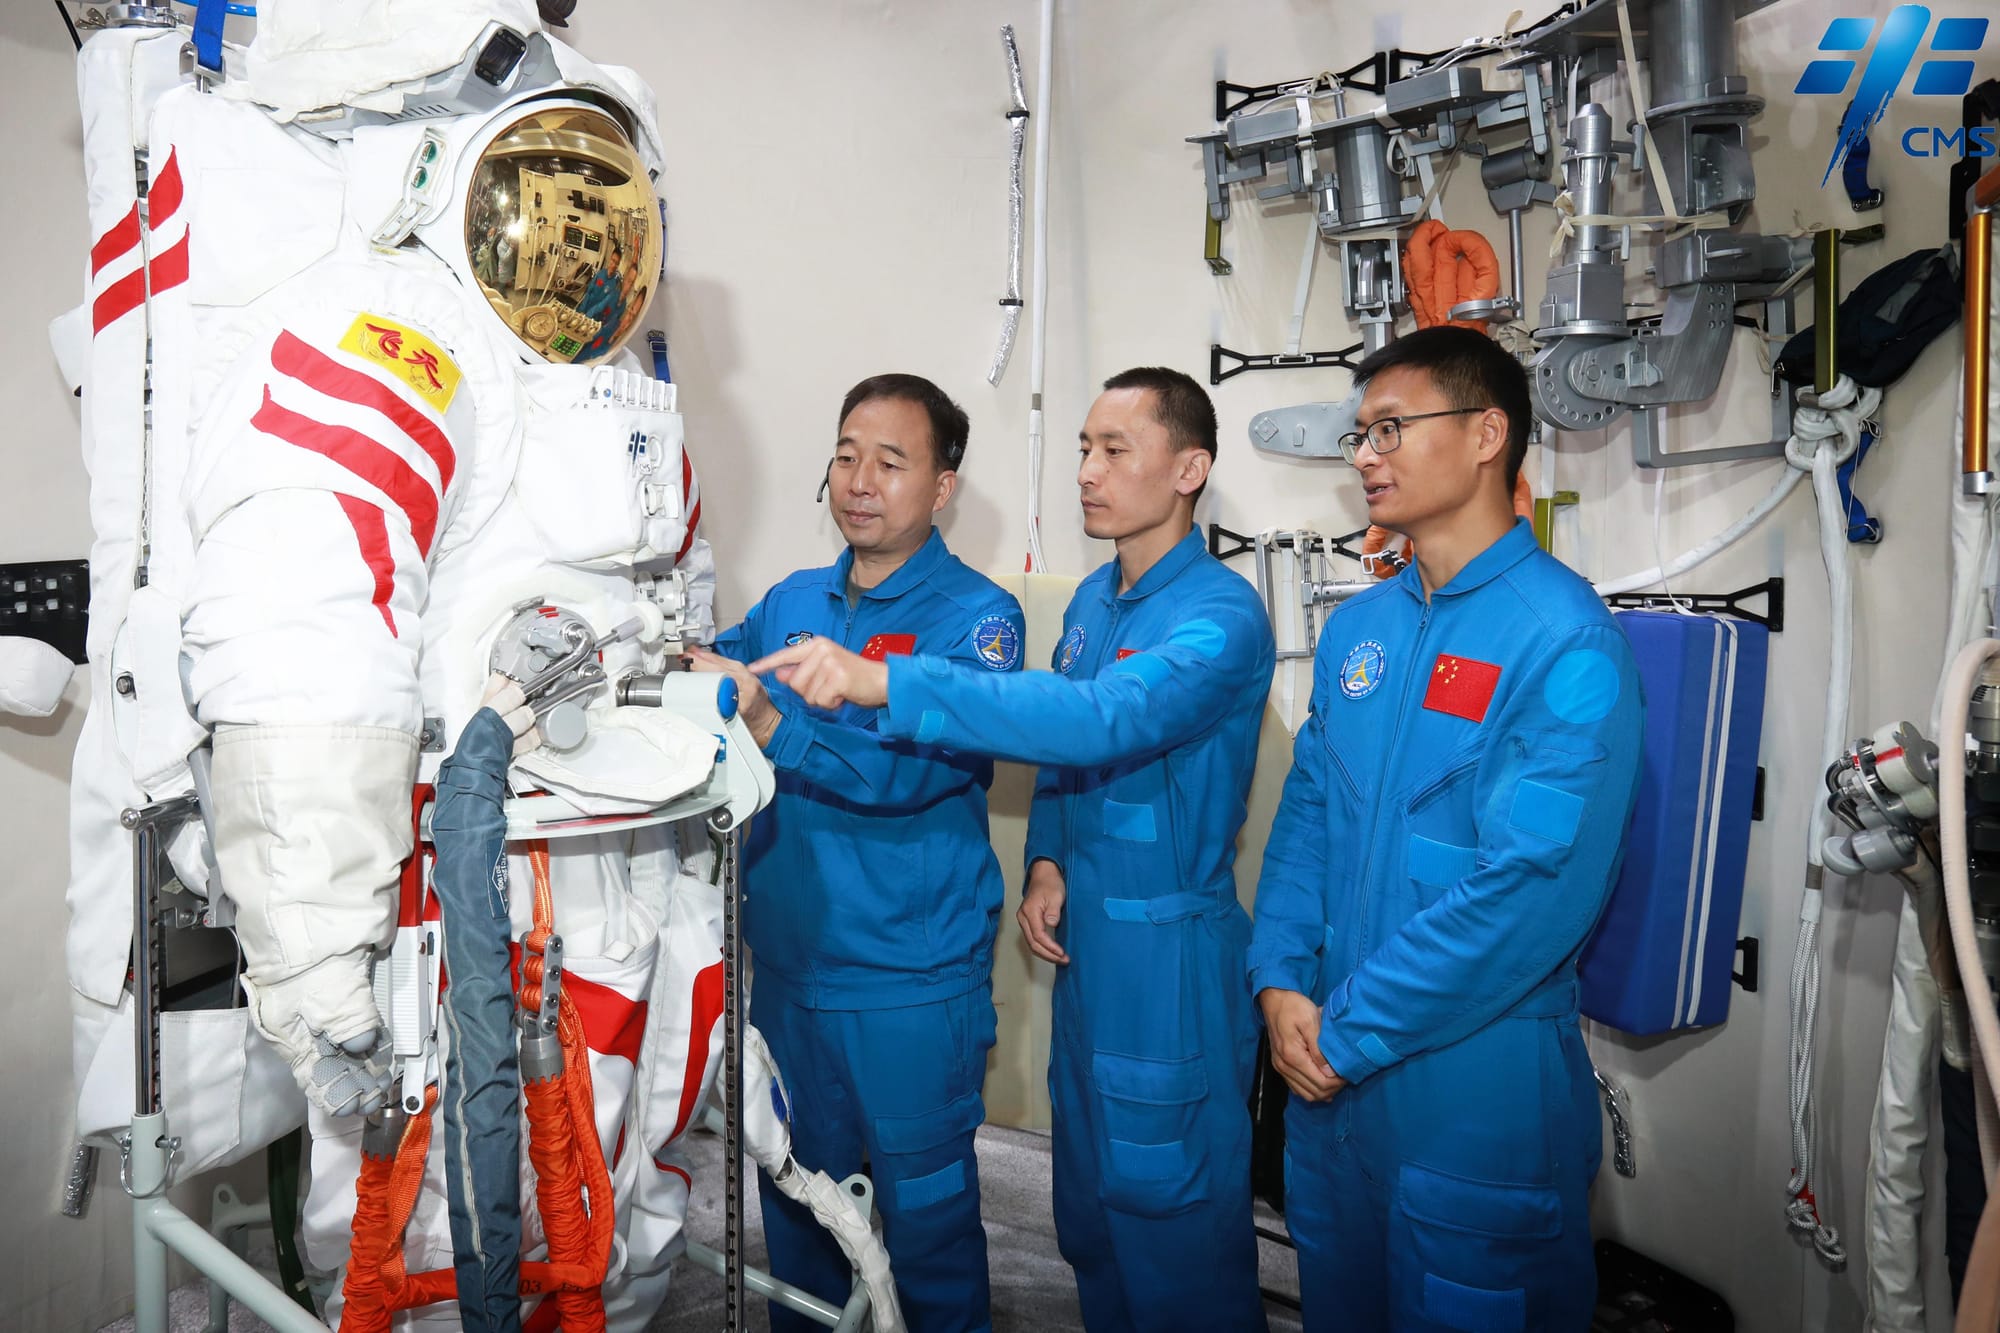 The crew of Shenzhou-16 training with a Feitian space suit, (from left to right) Jing Haipeng, Zhu Yangzhu, and Gui Haichao. ©China Manned Space Agency